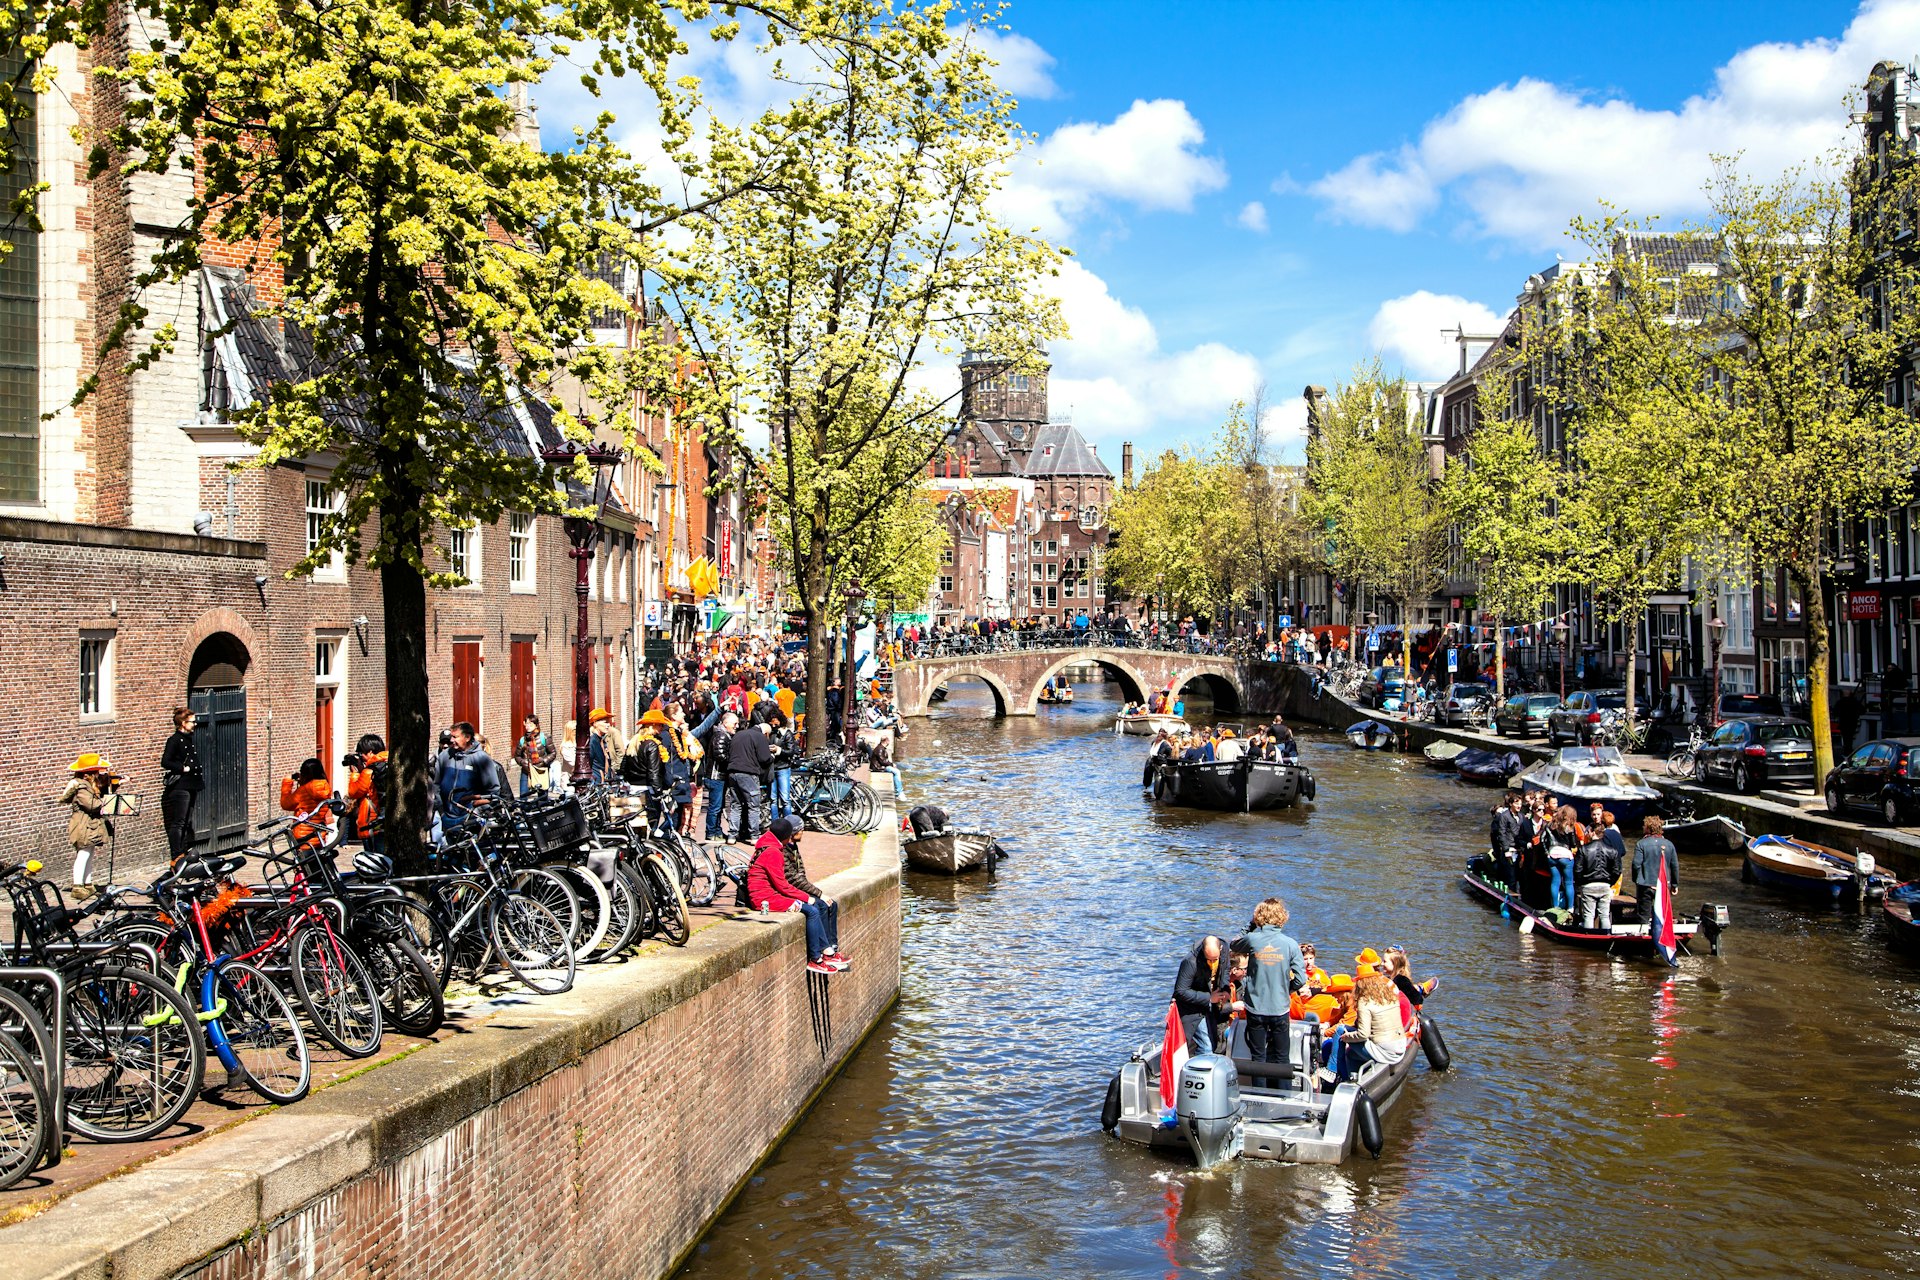 Streets and Canals of Amsterdam full of people dressed in orange celebrating King's day on April 27, 2015 in Amsterdam, 